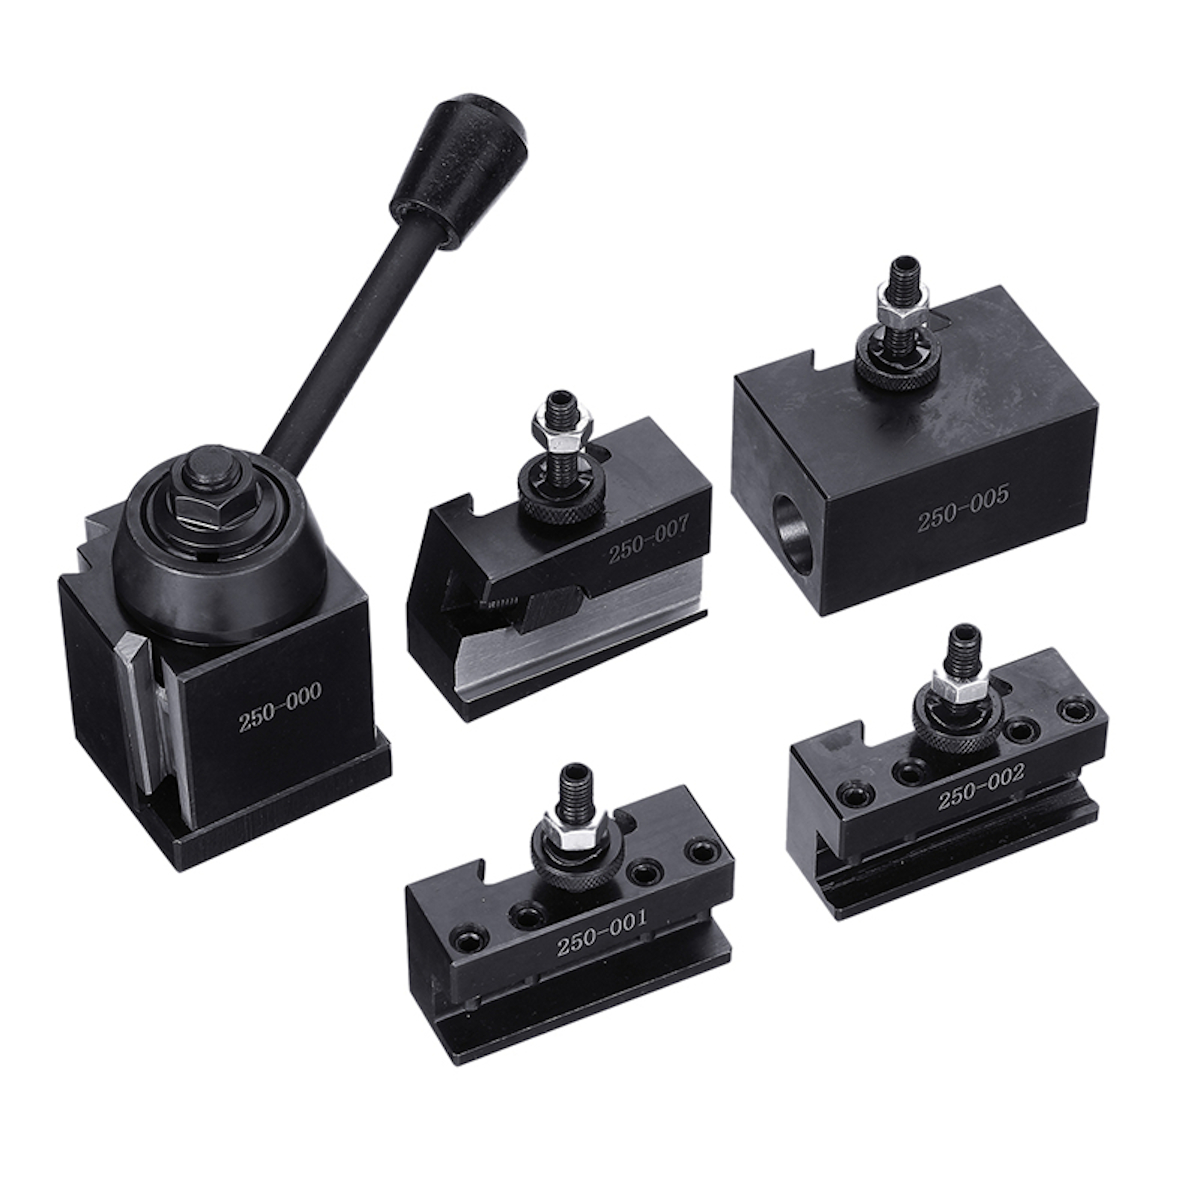 2-Piece-Set-Of-Machifit-250-000-Wedge-Main-Body-Tool-Holder-Exclusively-For-250-100250-111-Tool-Hold-1824364-1